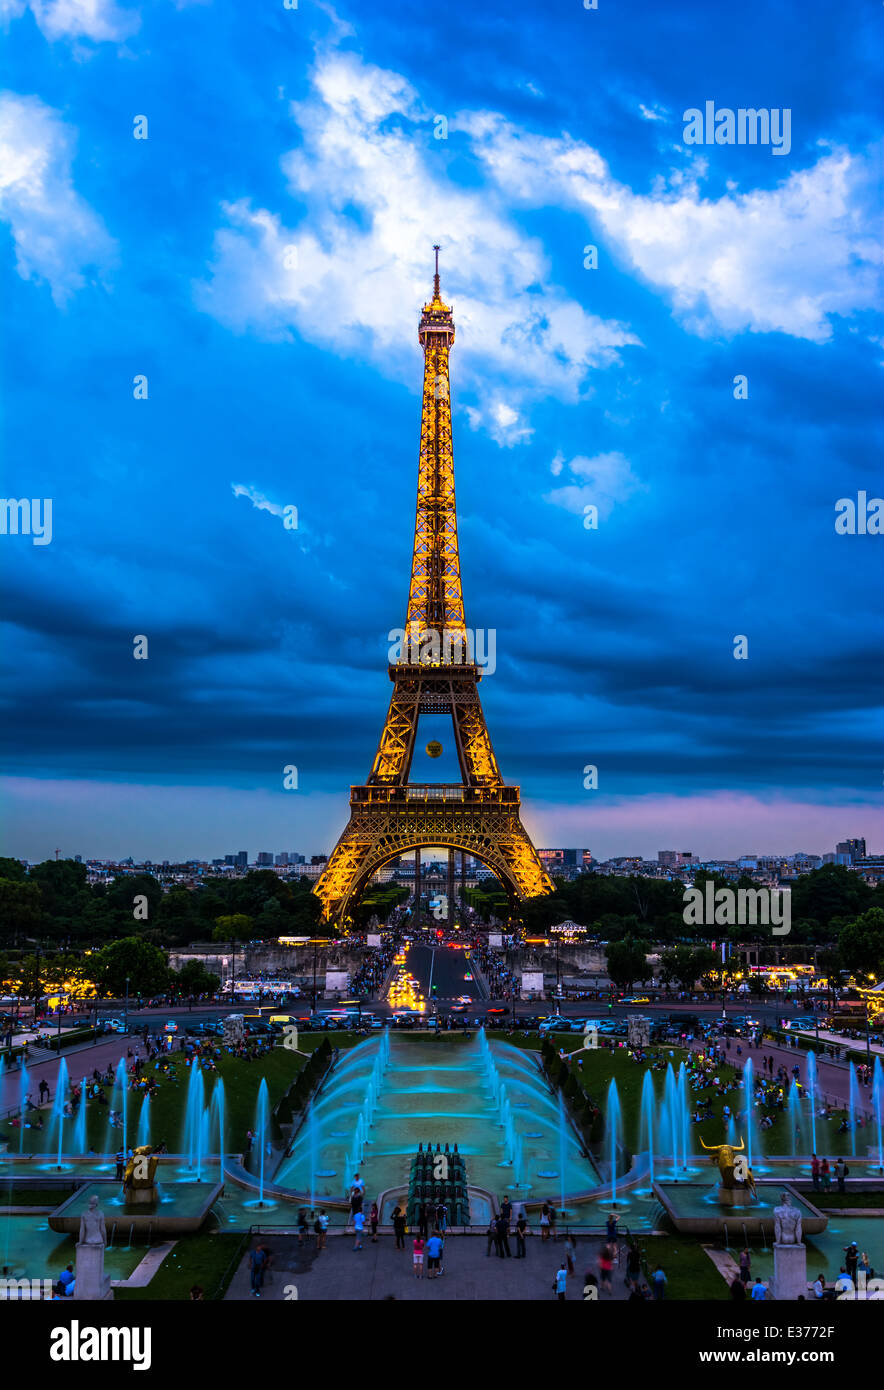 Eiffel Tower, Paris, France - in the night Stock Photo